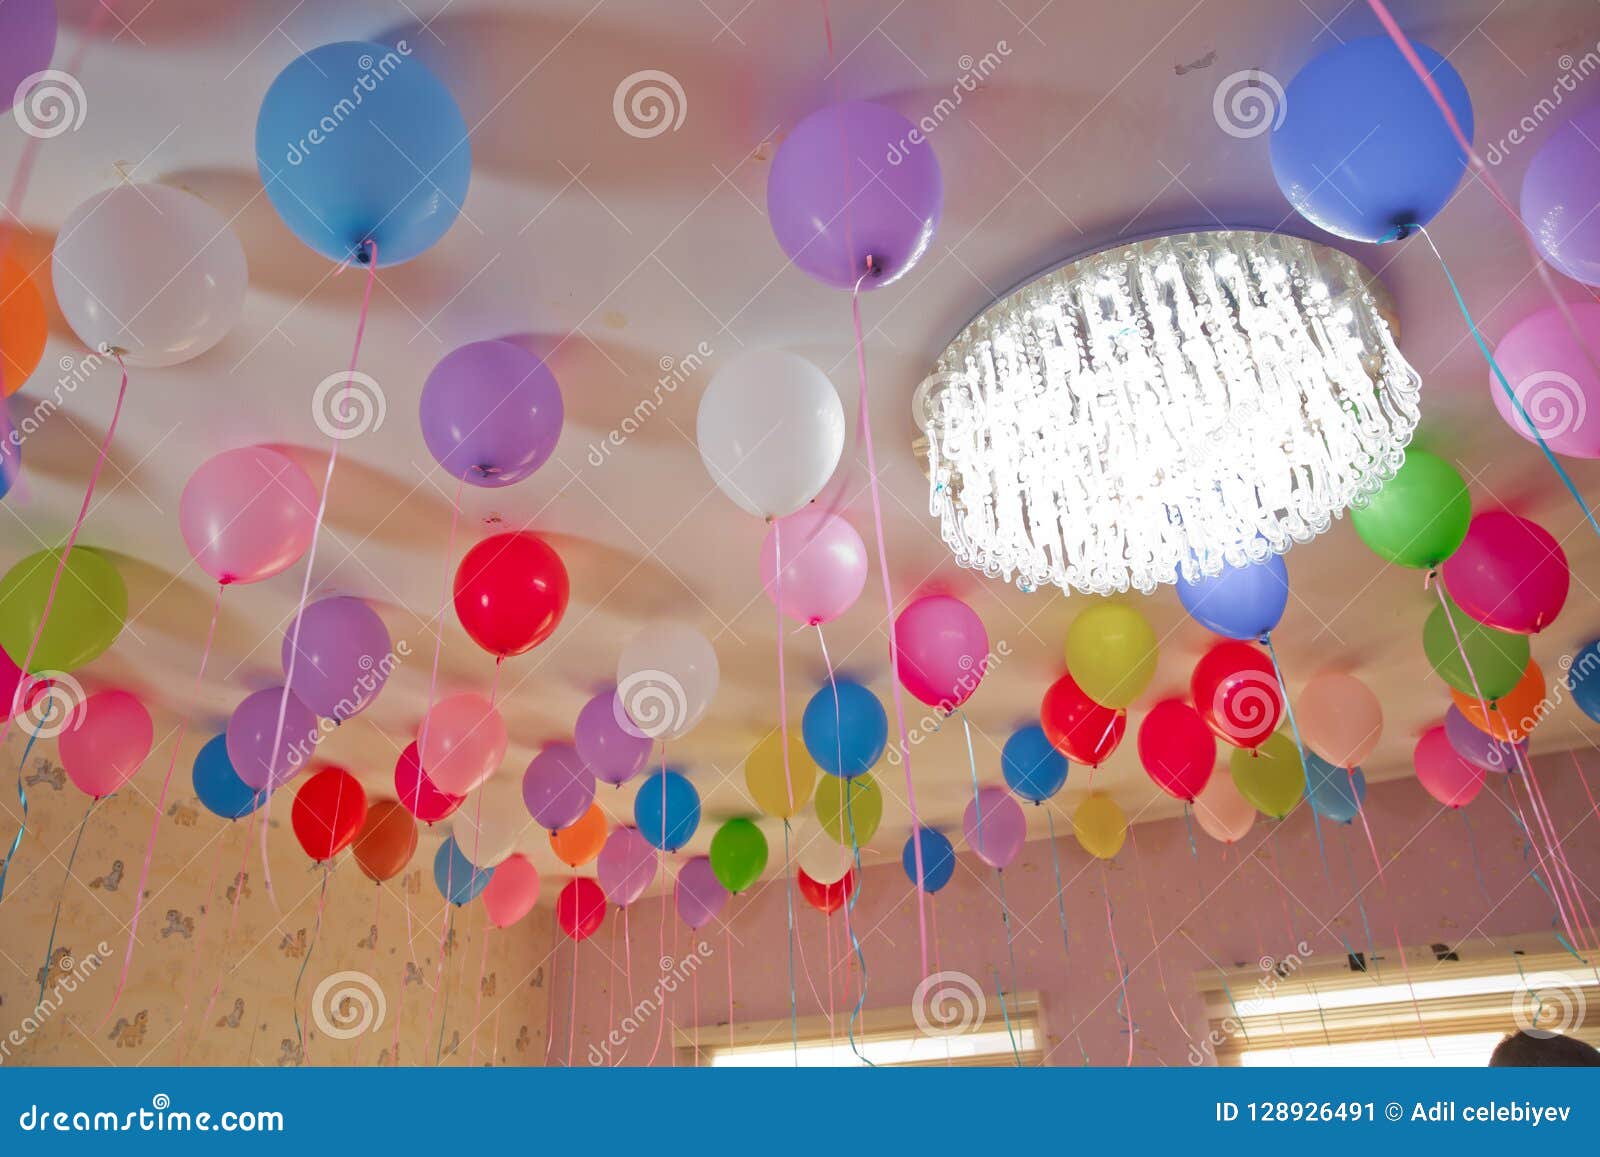 Colorfull Balloons Float On The White Ceiling In The Room